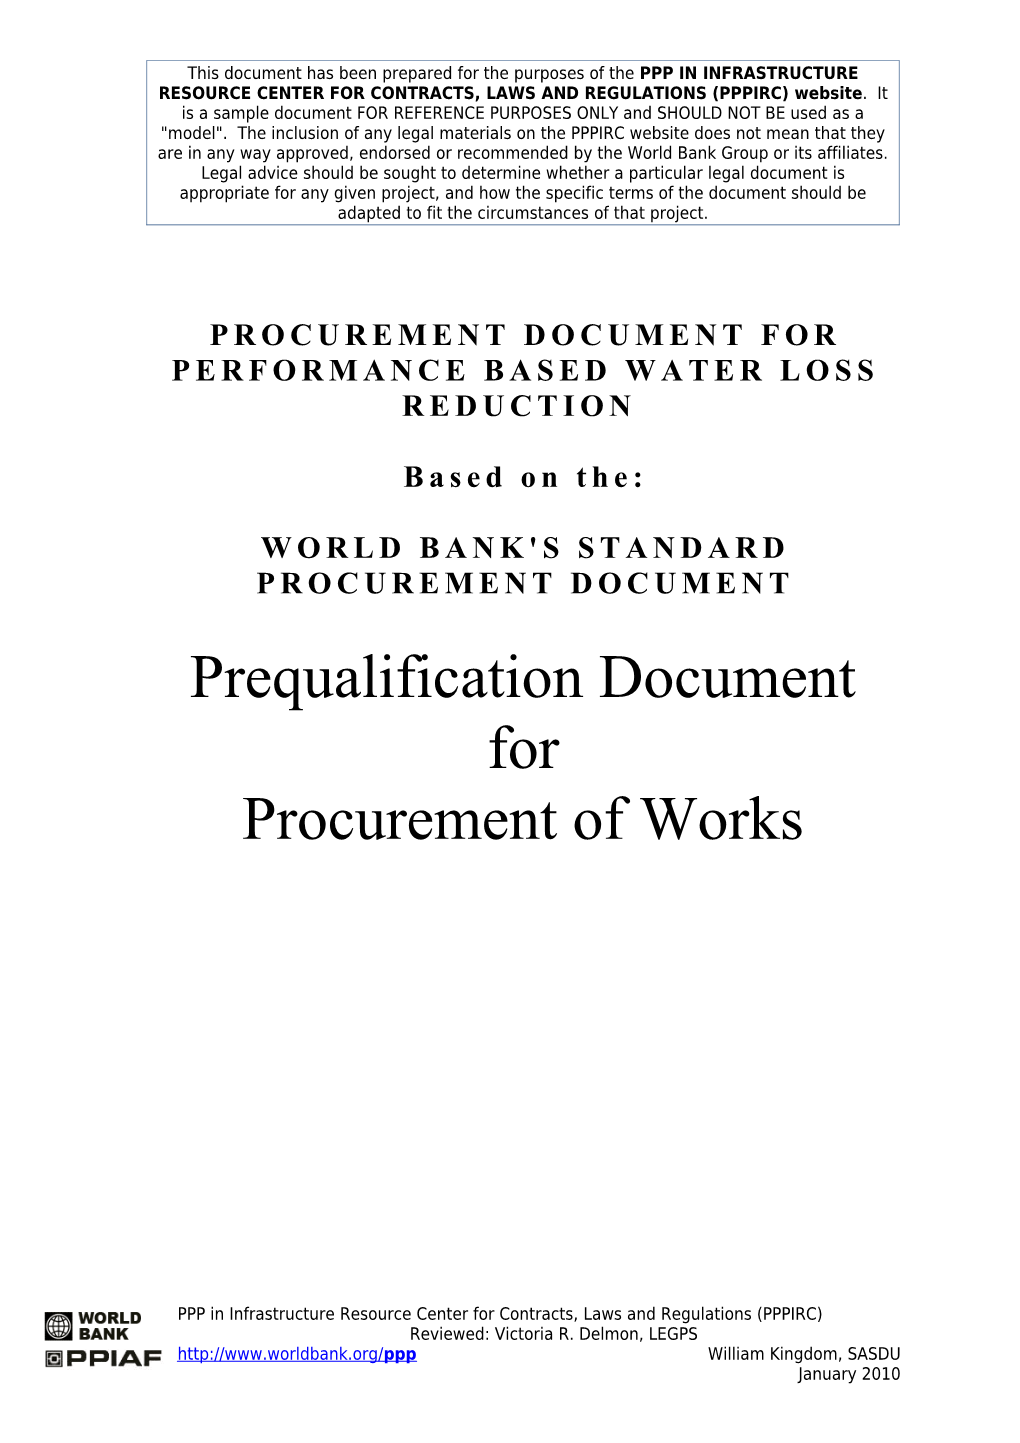 PQ Document for Performance Based Leakage Reduction